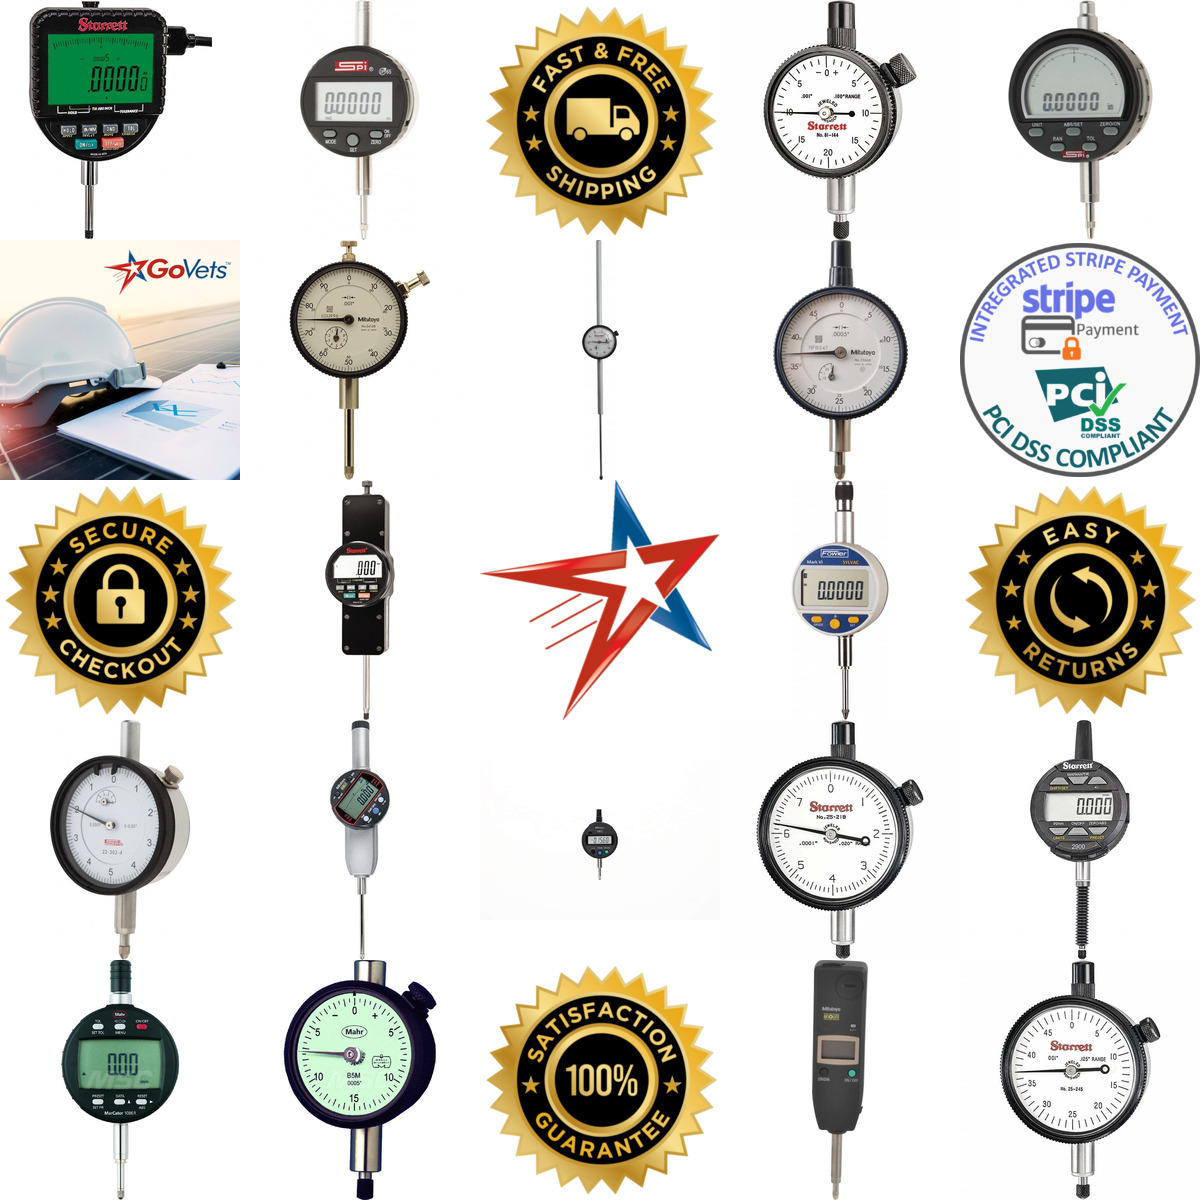 A selection of Drop Indicators products on GoVets